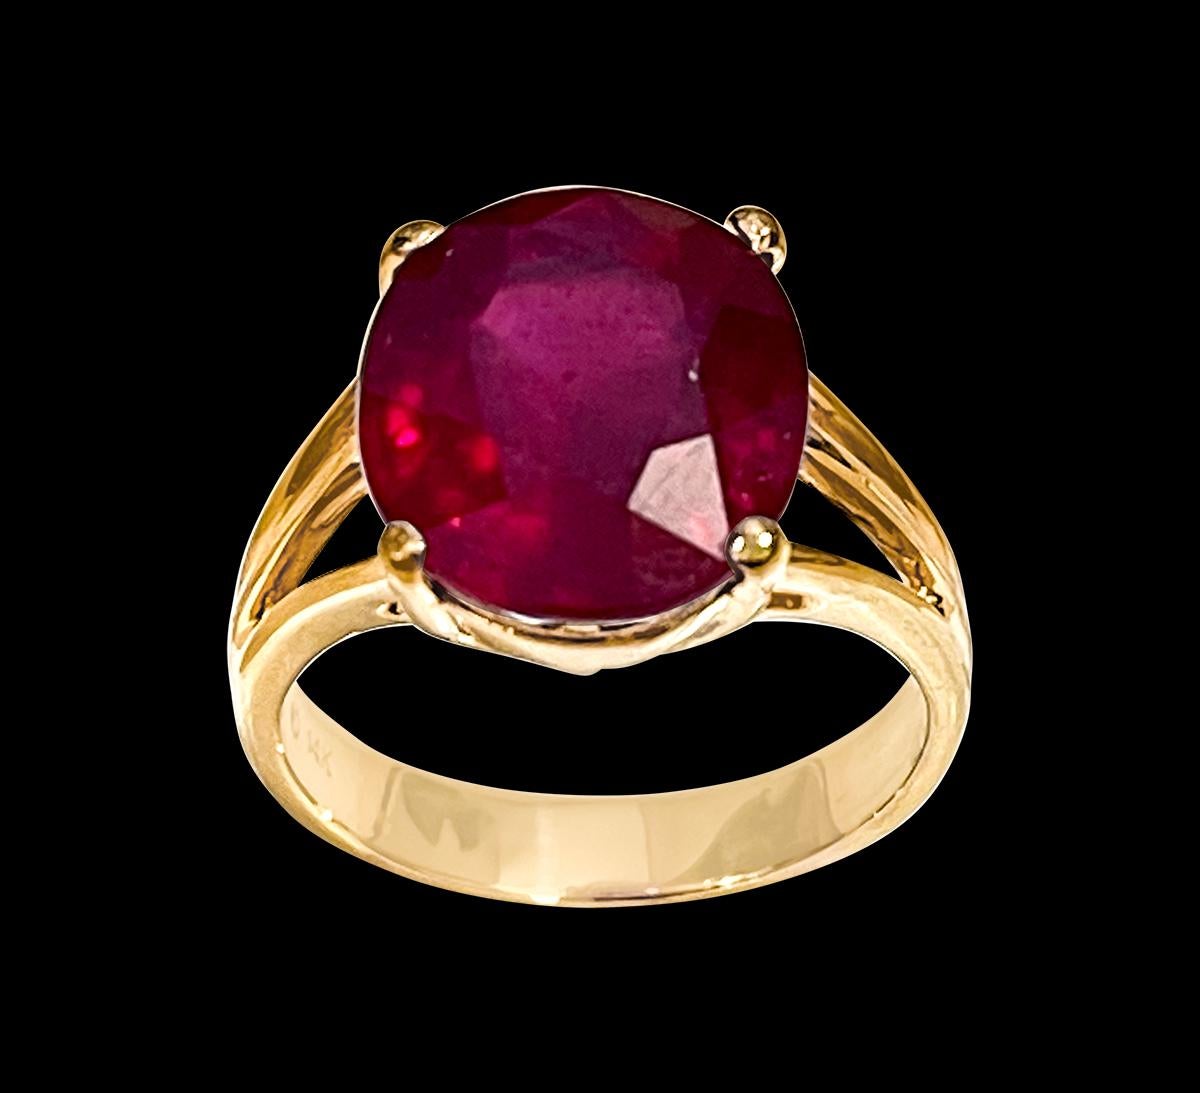 10X12  Oval  Cut  approximately 6.5 Carat Treated Ruby  14 Karat Yellow Gold Ring Size 5.5
Its a treated ruby
 prong set
14 Karat Yellow Gold: 4.9gram
Ring Size 5.5 ( can be altered for no charge )
Simple ring for the people  who don't like bling of